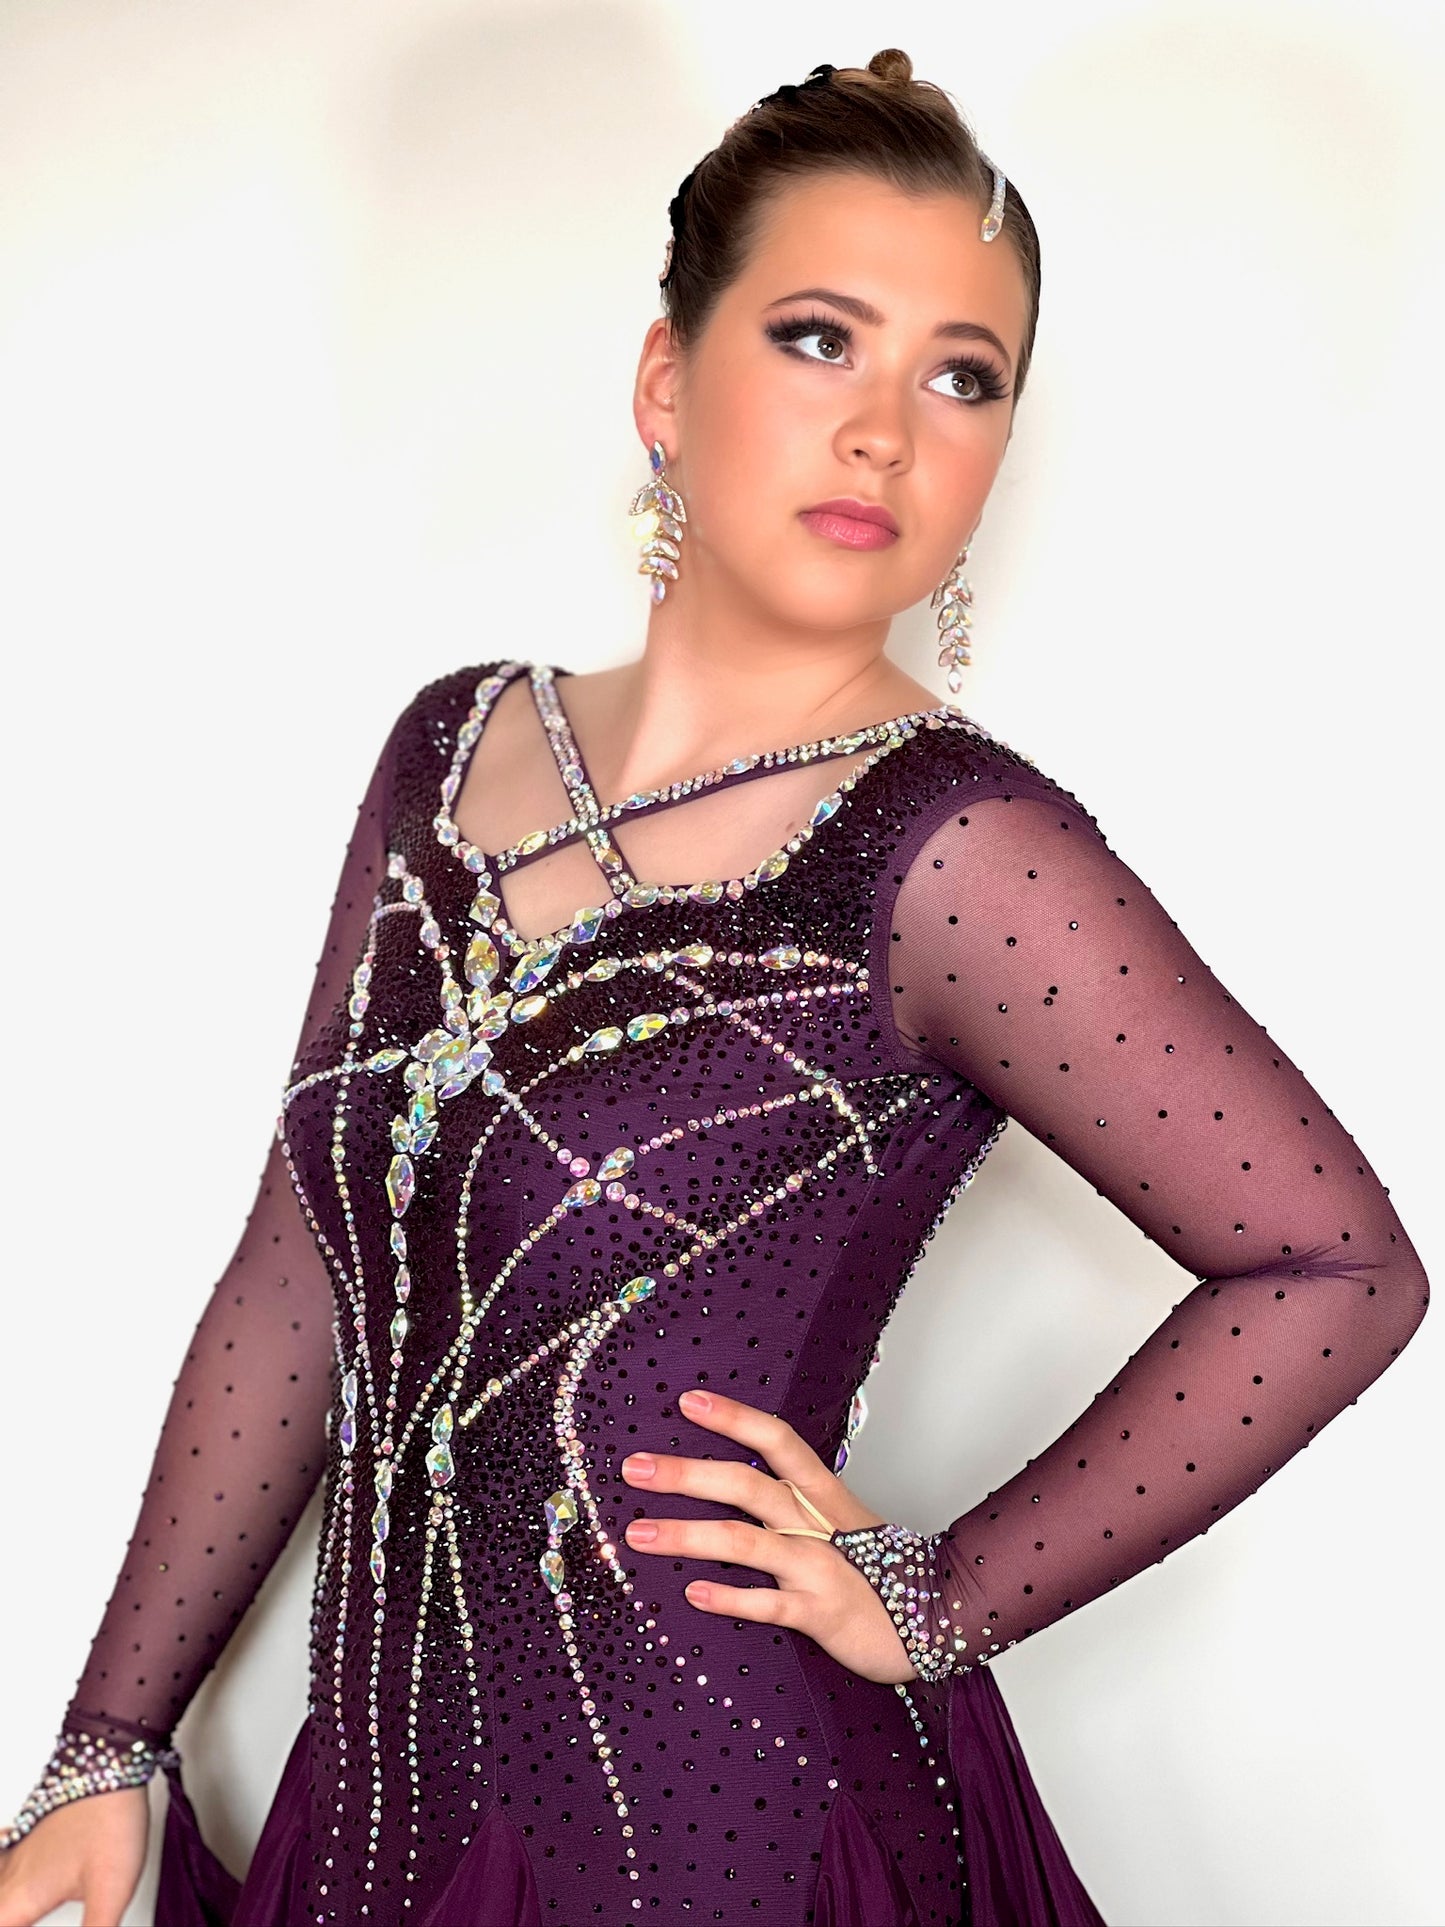 349 Plum Competition Ballroom Dance Dress. Stoned in AB with detailing to the front & back